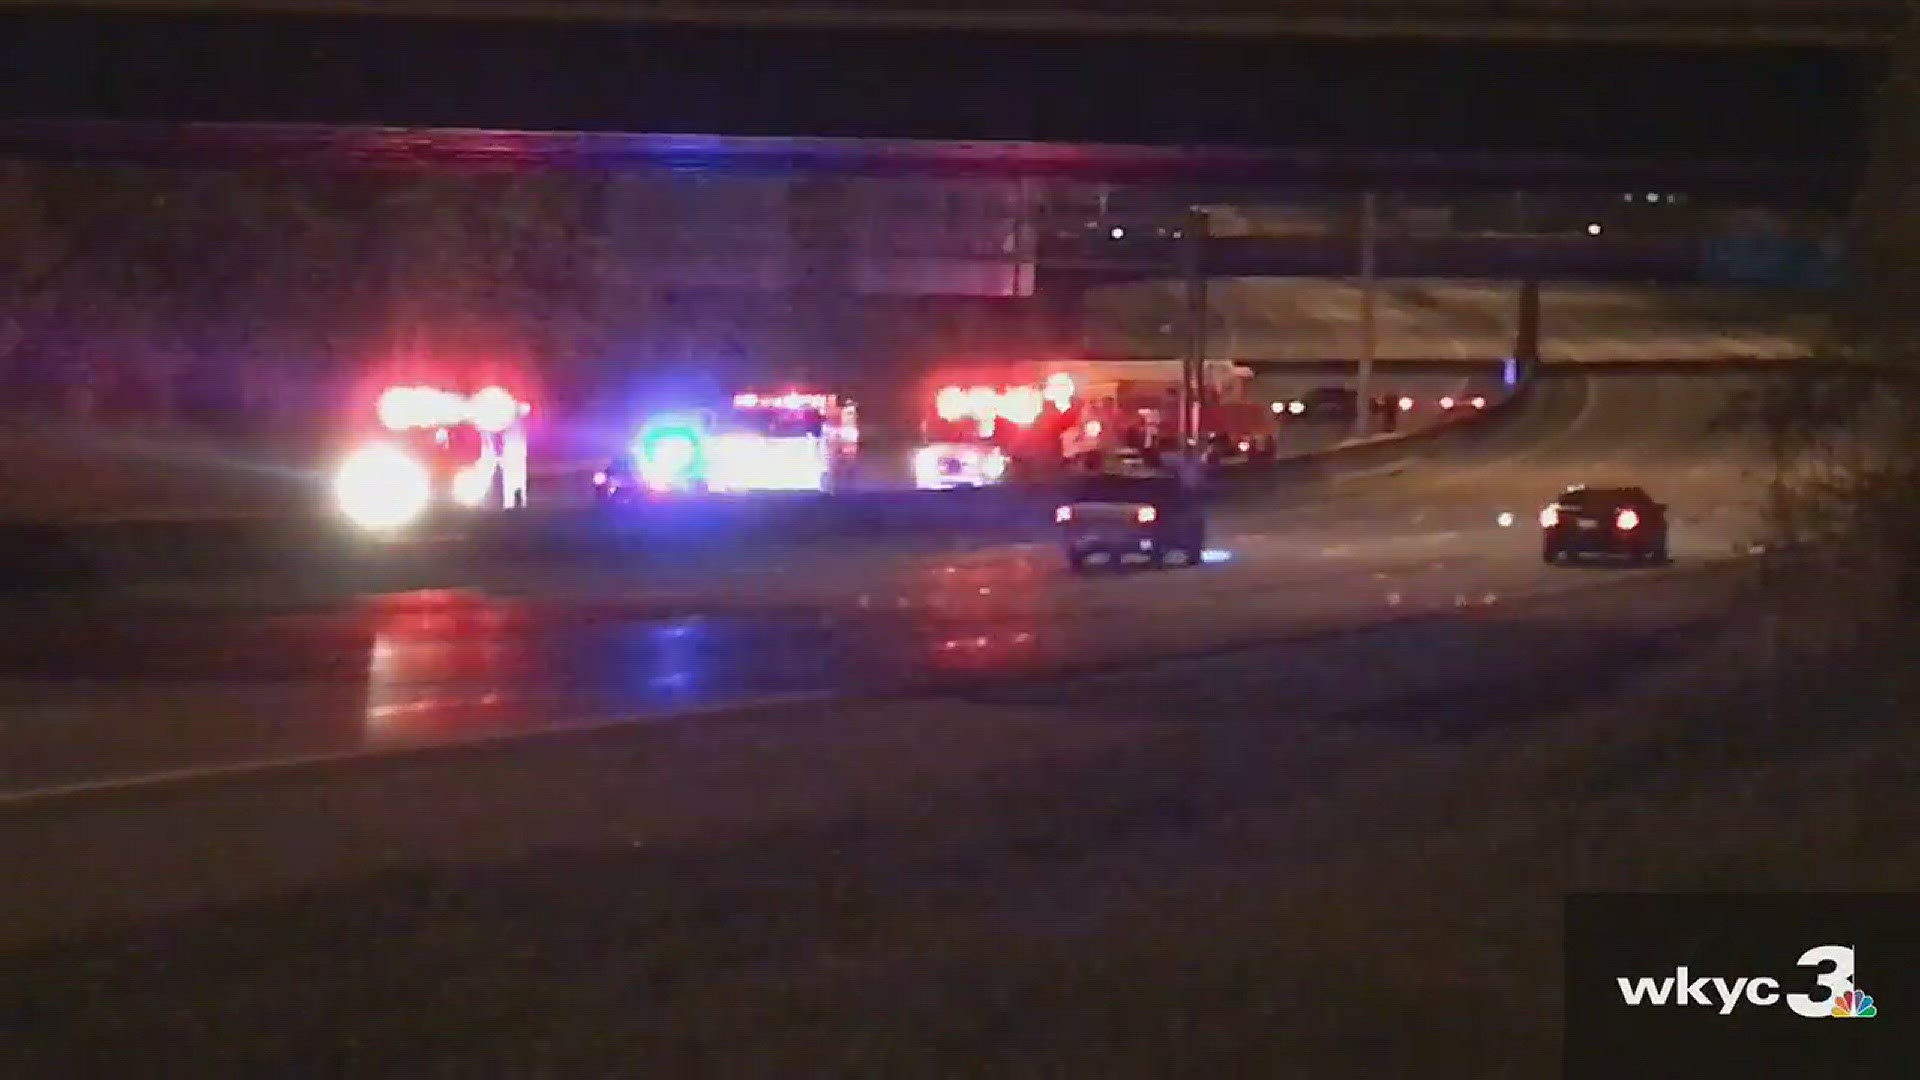 Oct. 26, 2017: Crews closed a portion of I-90 East due to a deadly crash at W. 44th in Cleveland early this morning.